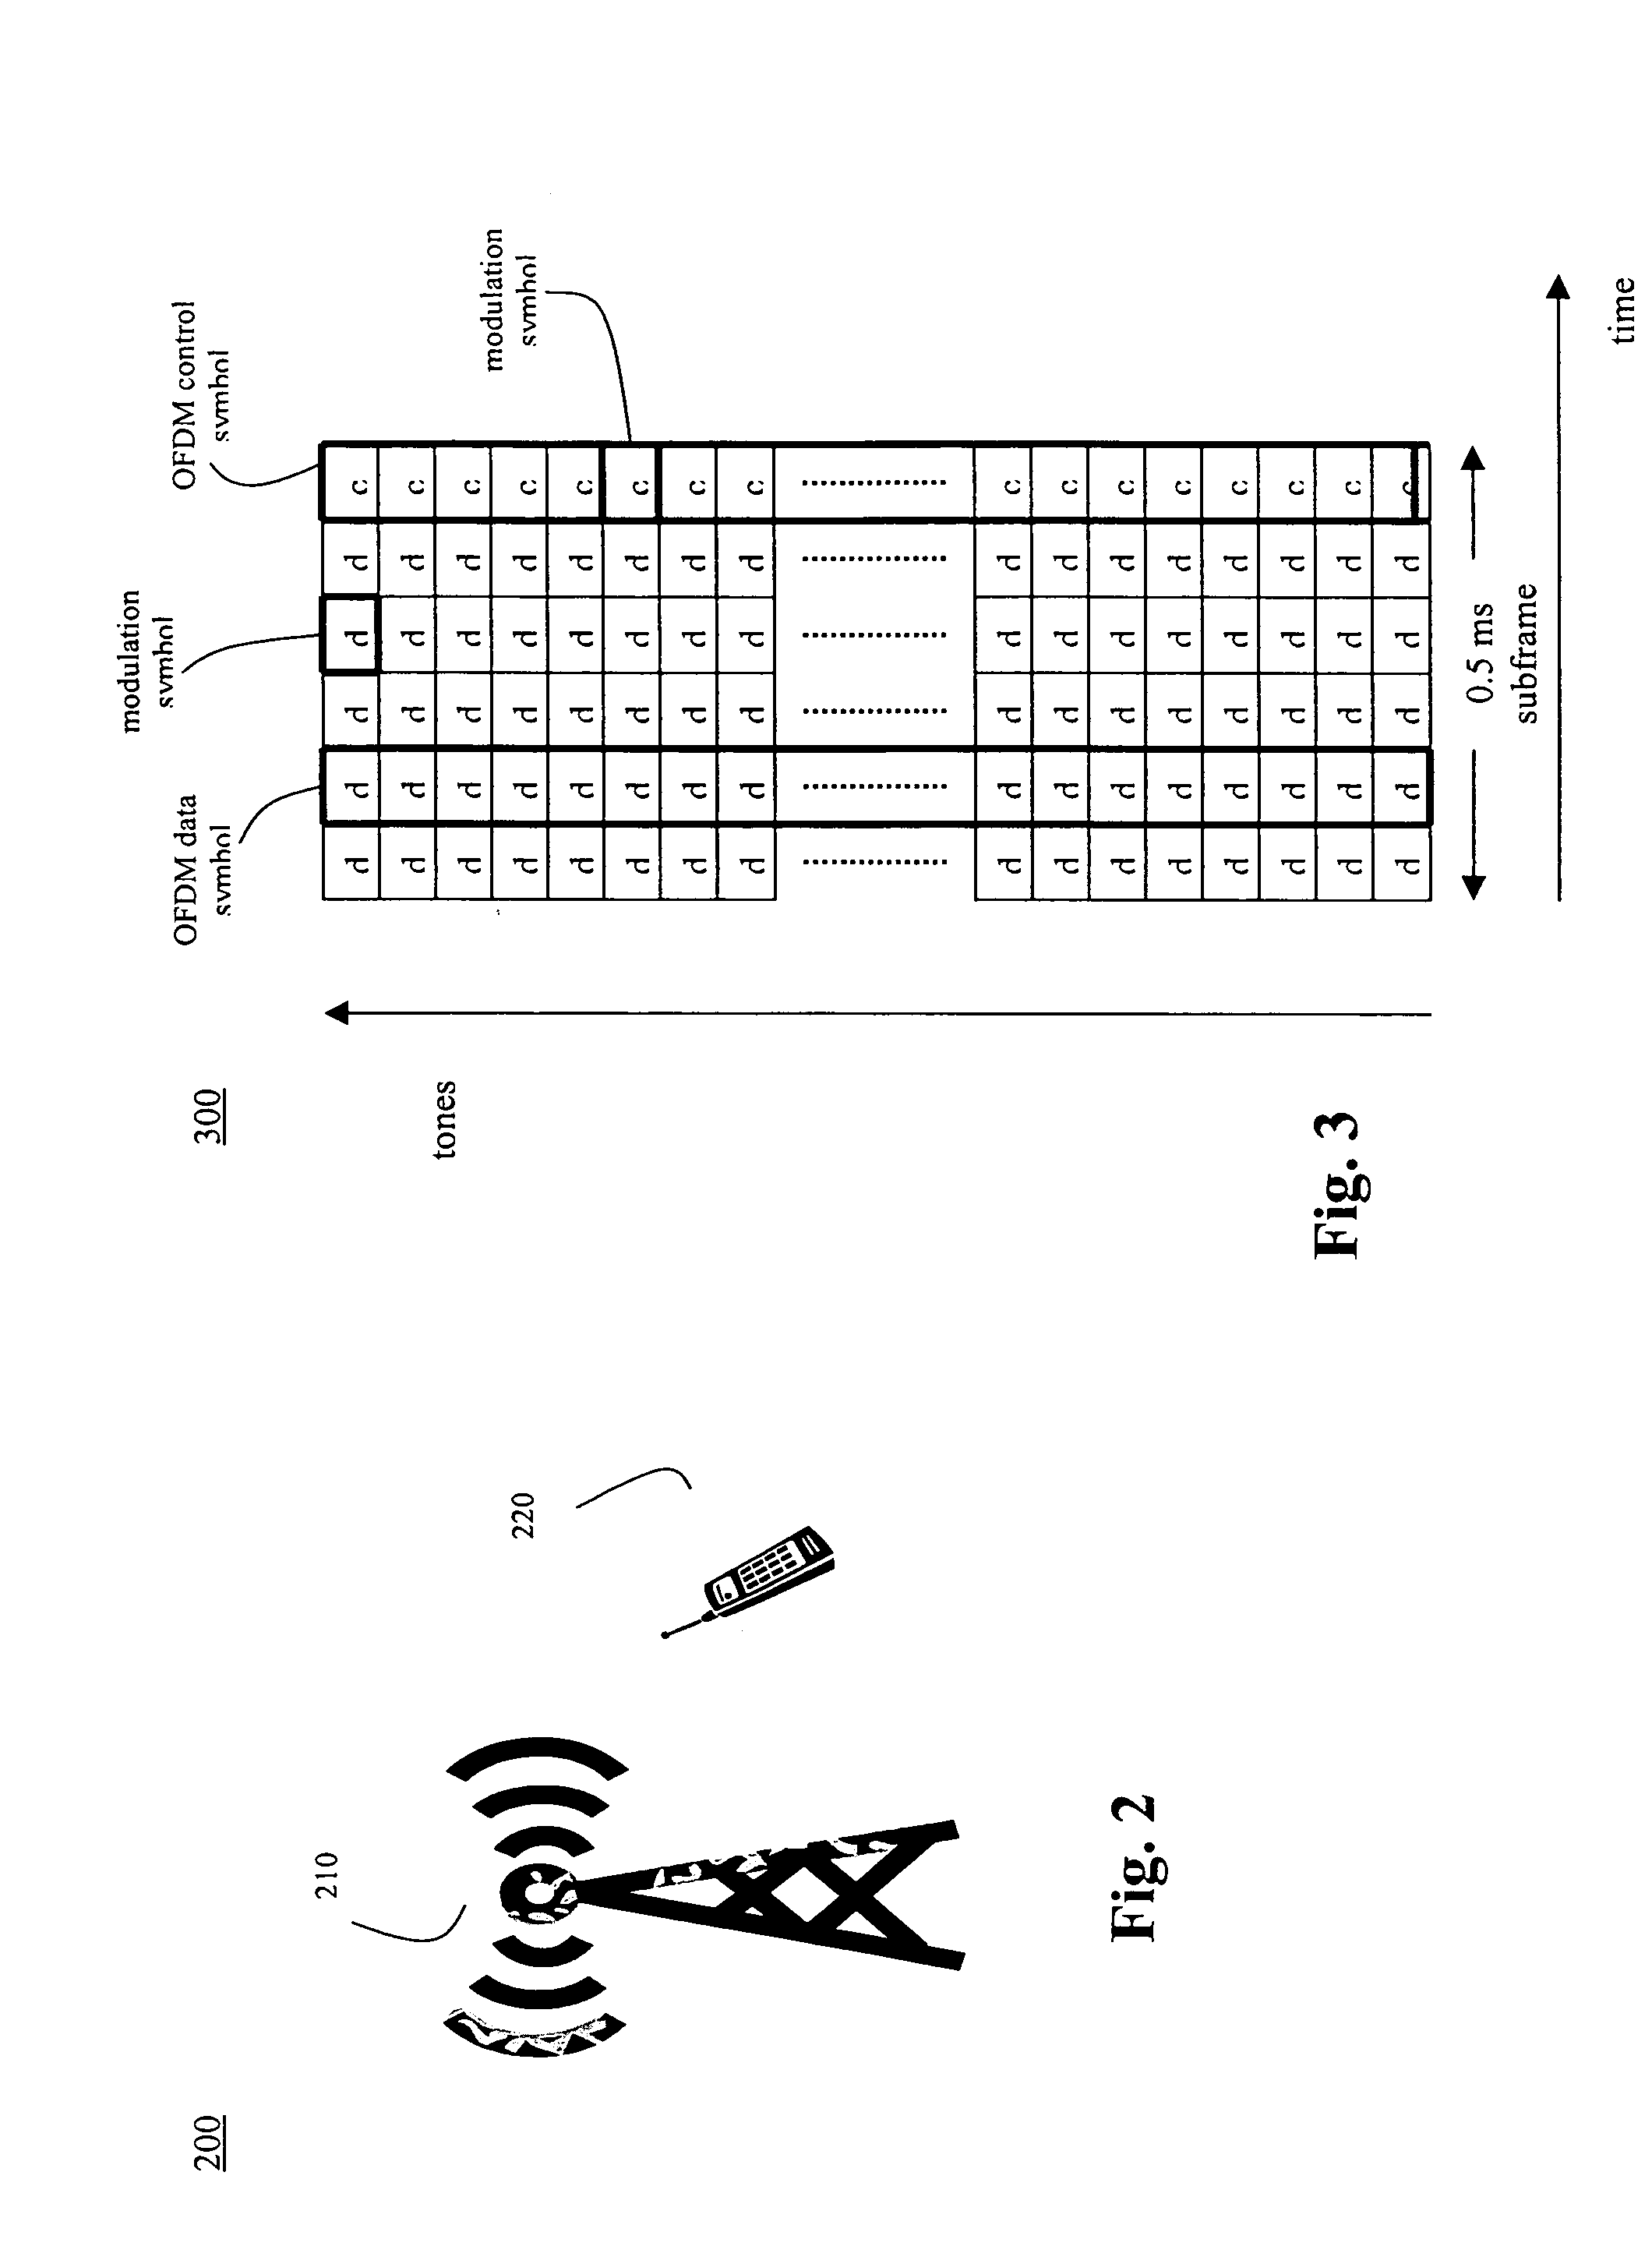 Method for transmitting fast scheduling request messages in scheduled packet data systems